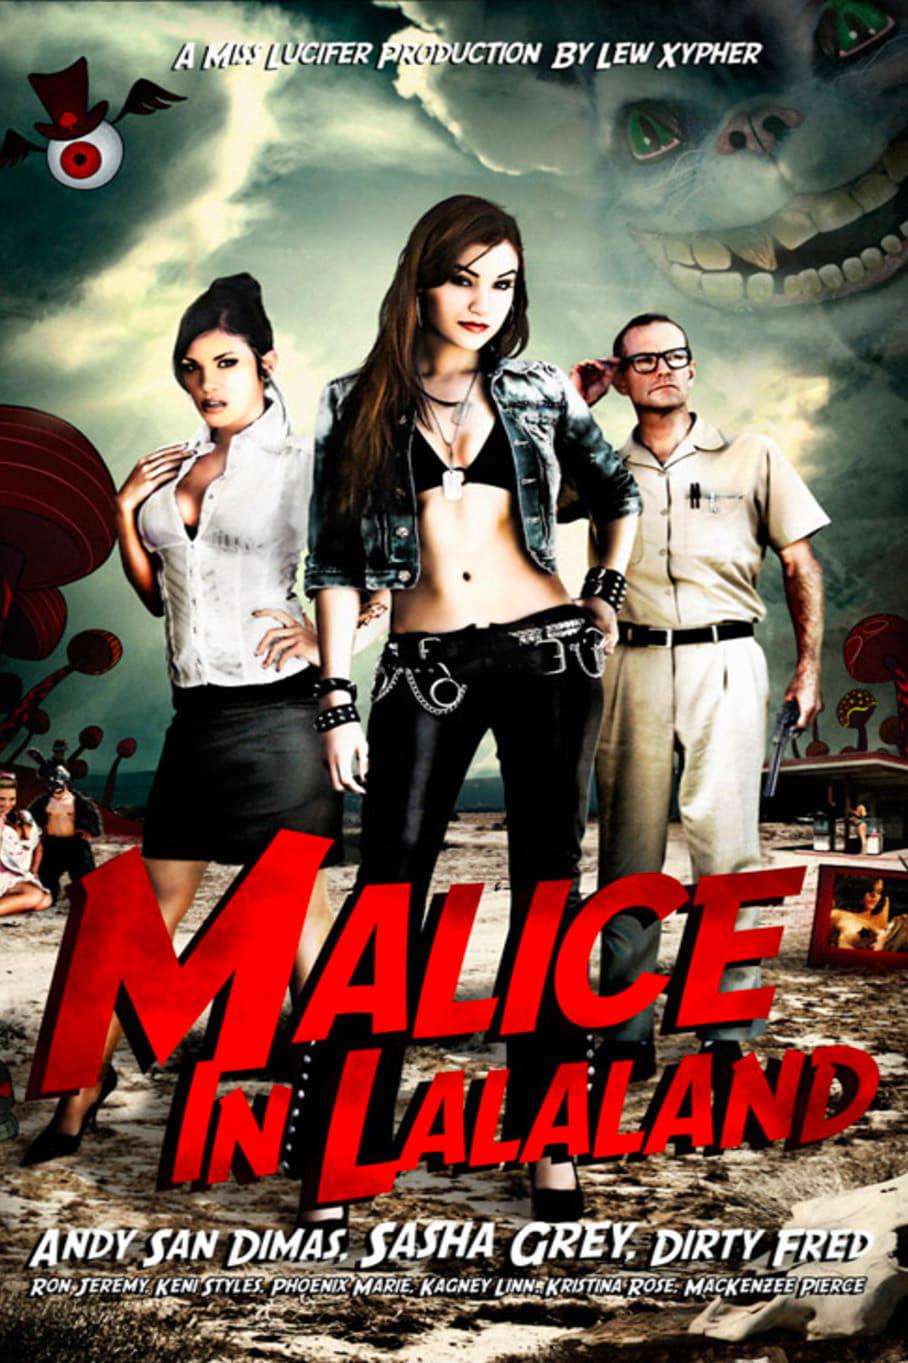 Malice in LaLaLand poster